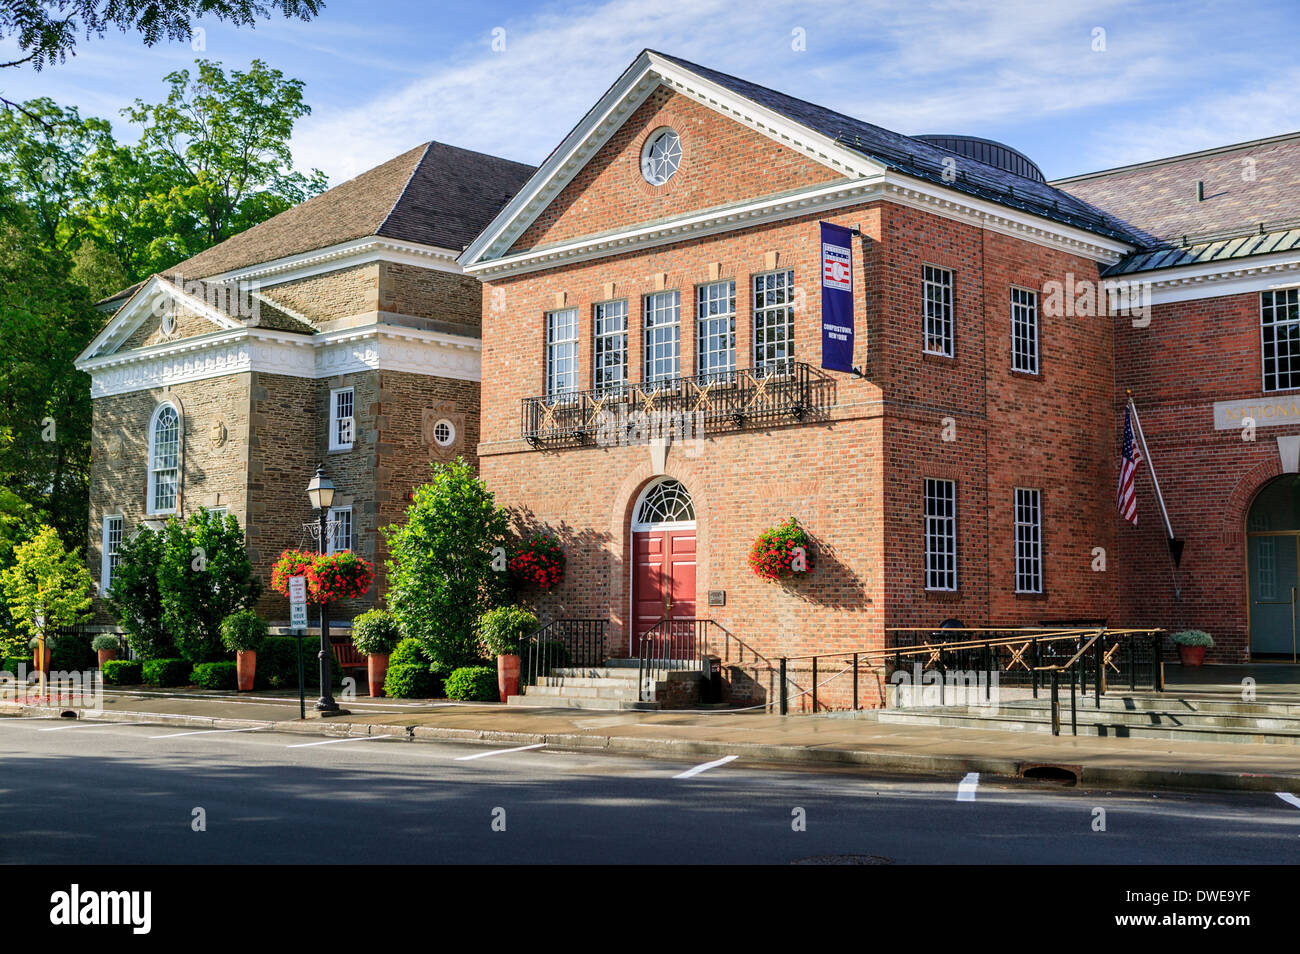 National Baseball Hall of Fame und Museum, Cooperstown, Otsego County, New York State, USA. Stockfoto